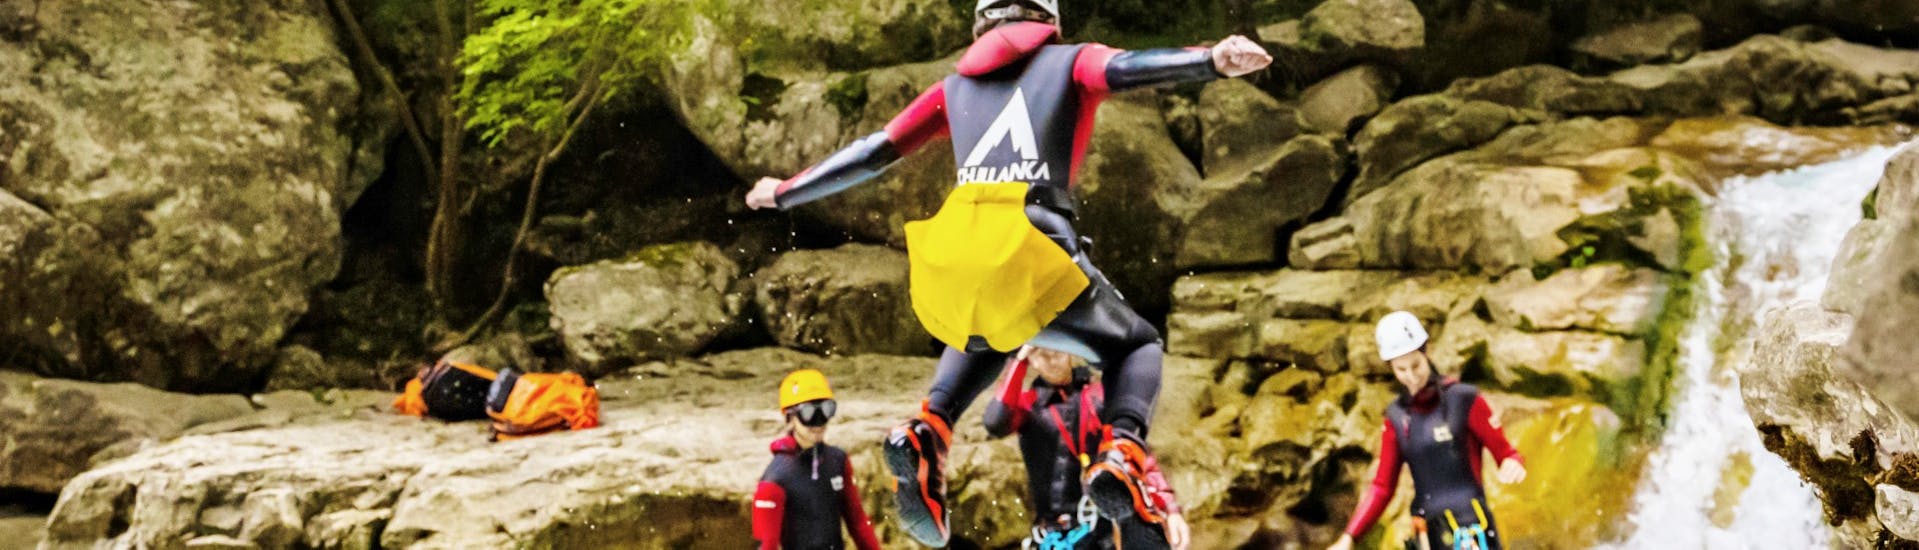 Person jumping in the river during the Full Day Canyoning in the Canyon of Barbaira in Italy with Canyons Experience Nice.